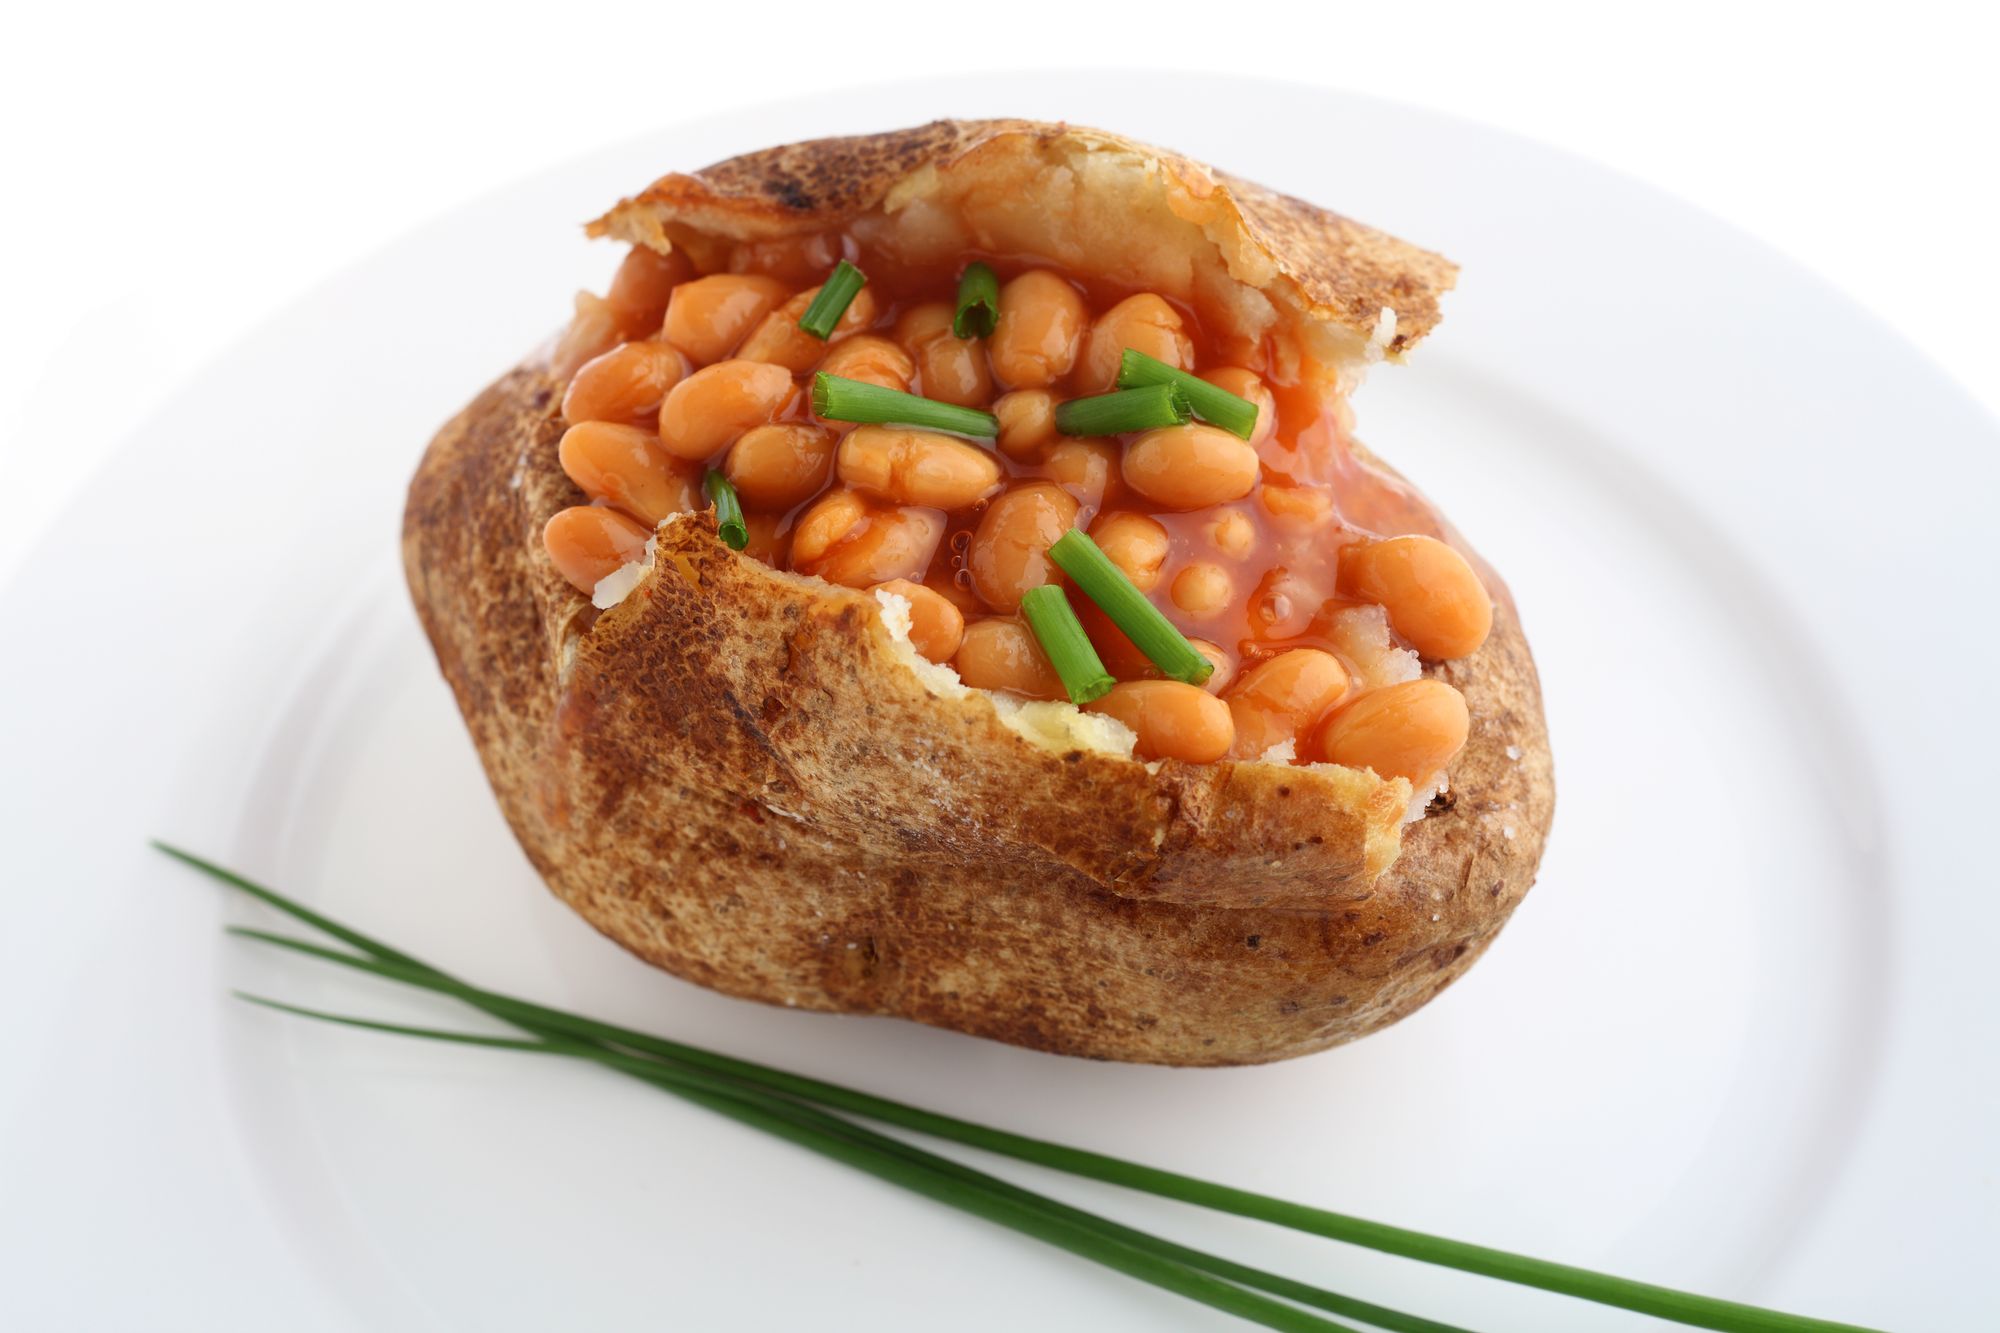 Spicy Kale and Beans Jacket Potato